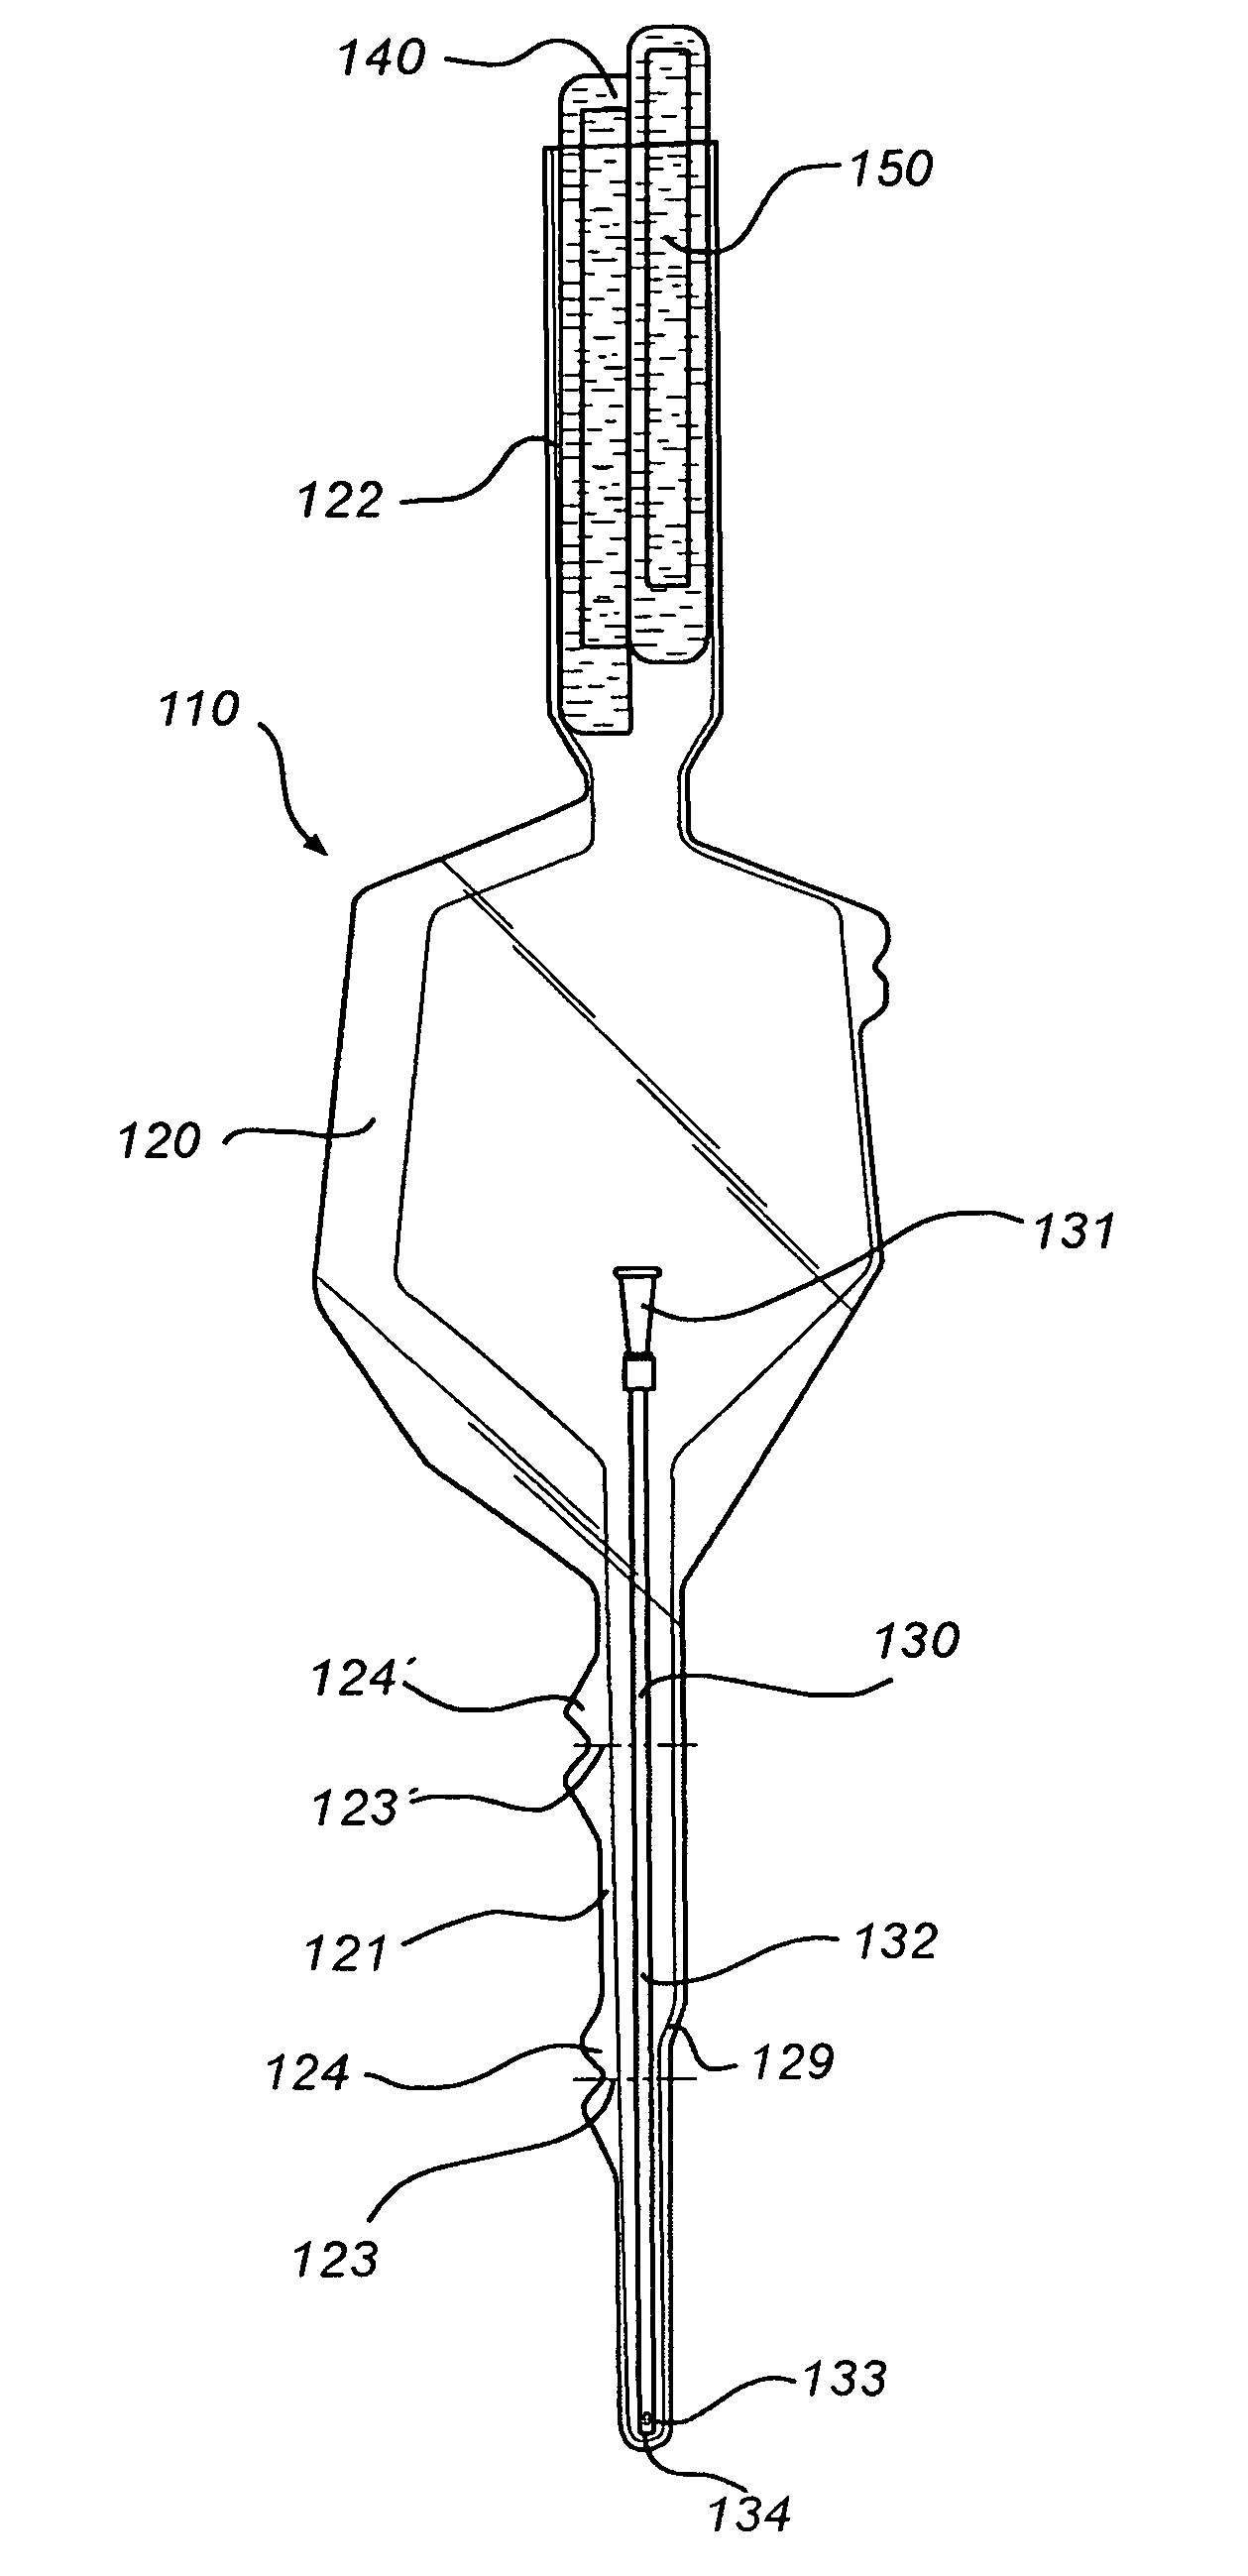 Catheter receptacle provided with an antimicrobial compound